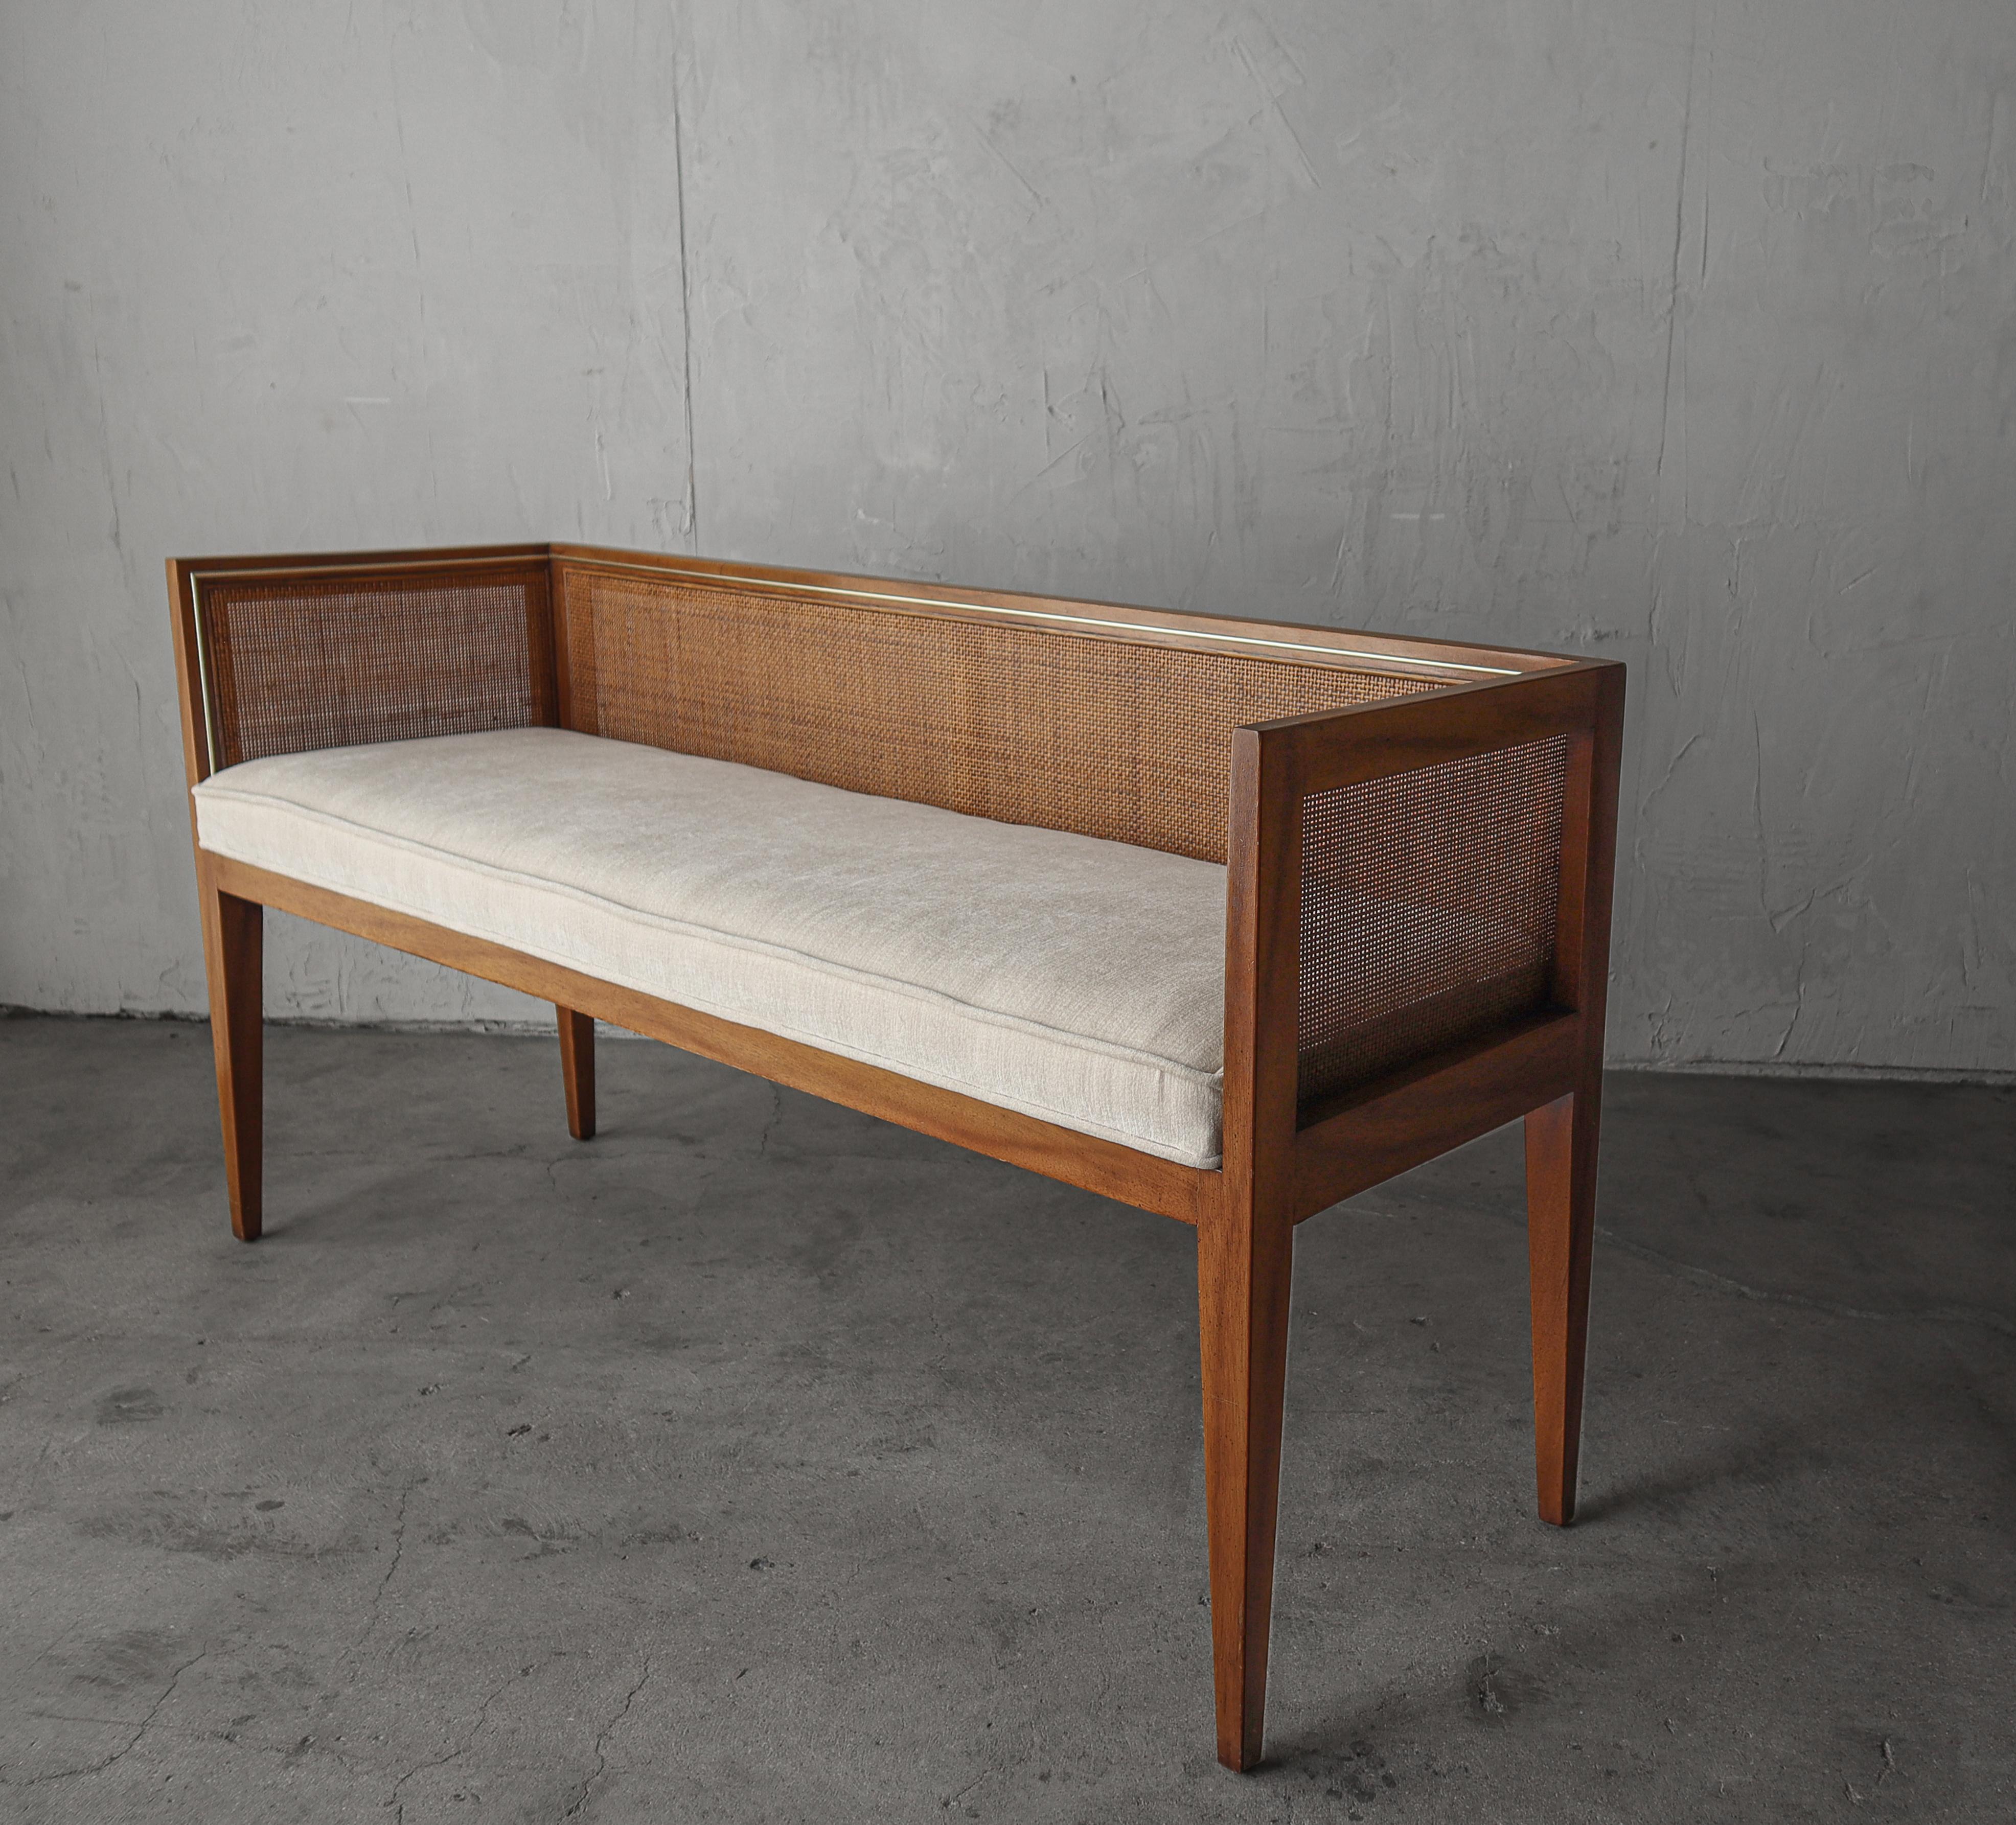 This simplistic beauty is a Mid-Century Modern original attributed to Edward Wormley for Dunbar.  This beautiful bench with its minimal footprint and big style, make it the perfect piece for almost any setting.

The bench is in excellent, solid